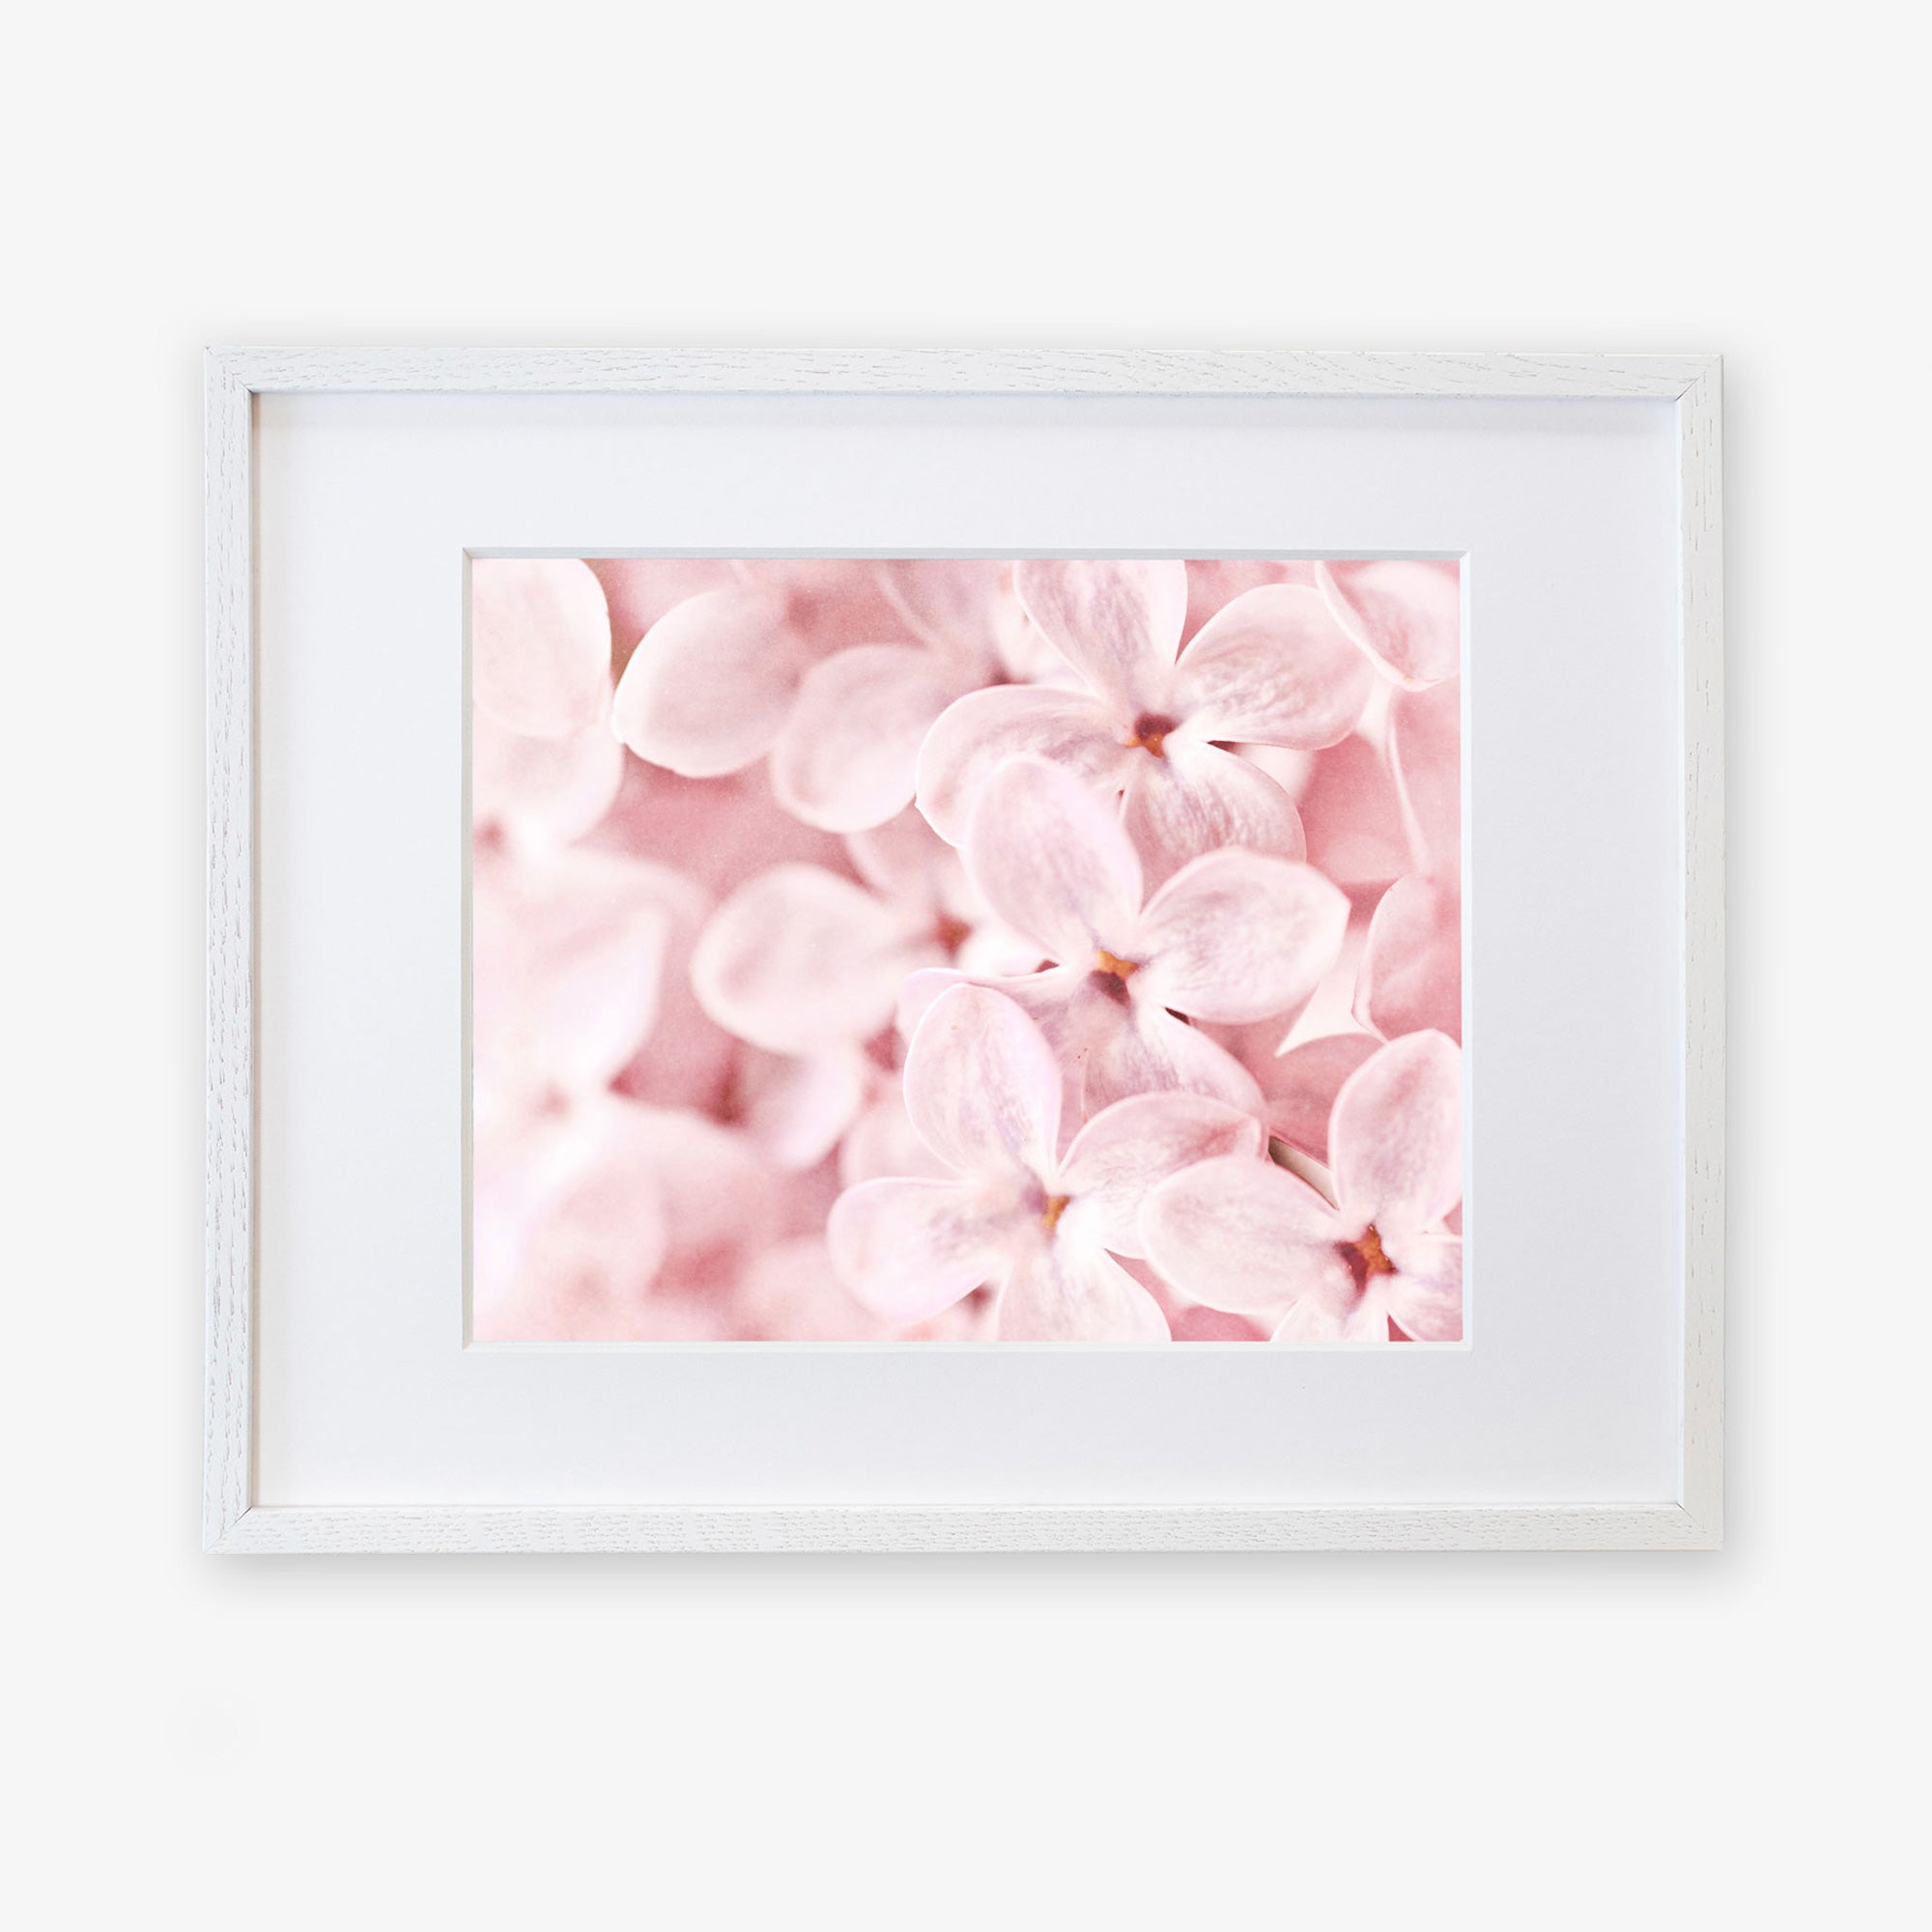 A framed photograph of soft pink lilac flowers, closely focused and filling the frame, printed on archival photographic paper and displayed in an elegant white frame against a pure white background from Offley Green's Pink Botanical Print, 'Bed of Lilacs'.